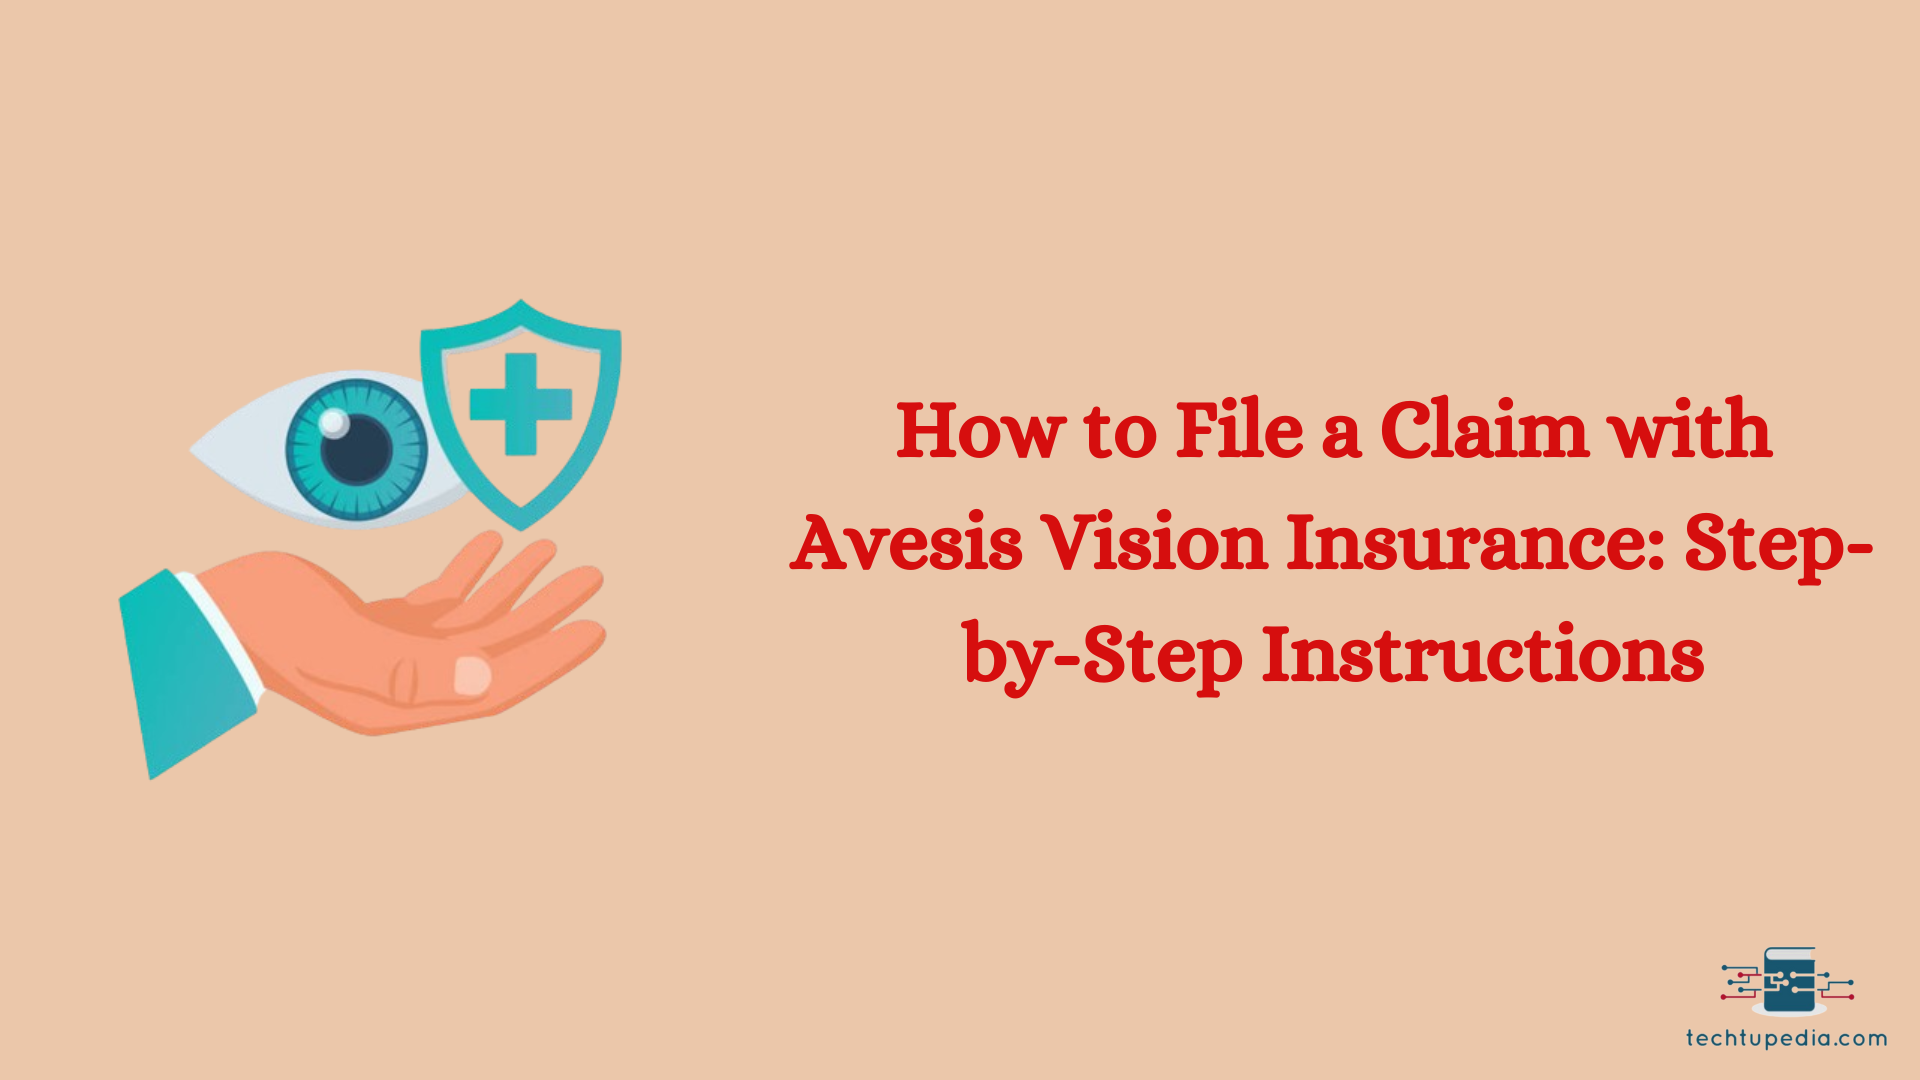 How to File a Claim with Avesis Vision Insurance: Step-by-Step Instructions